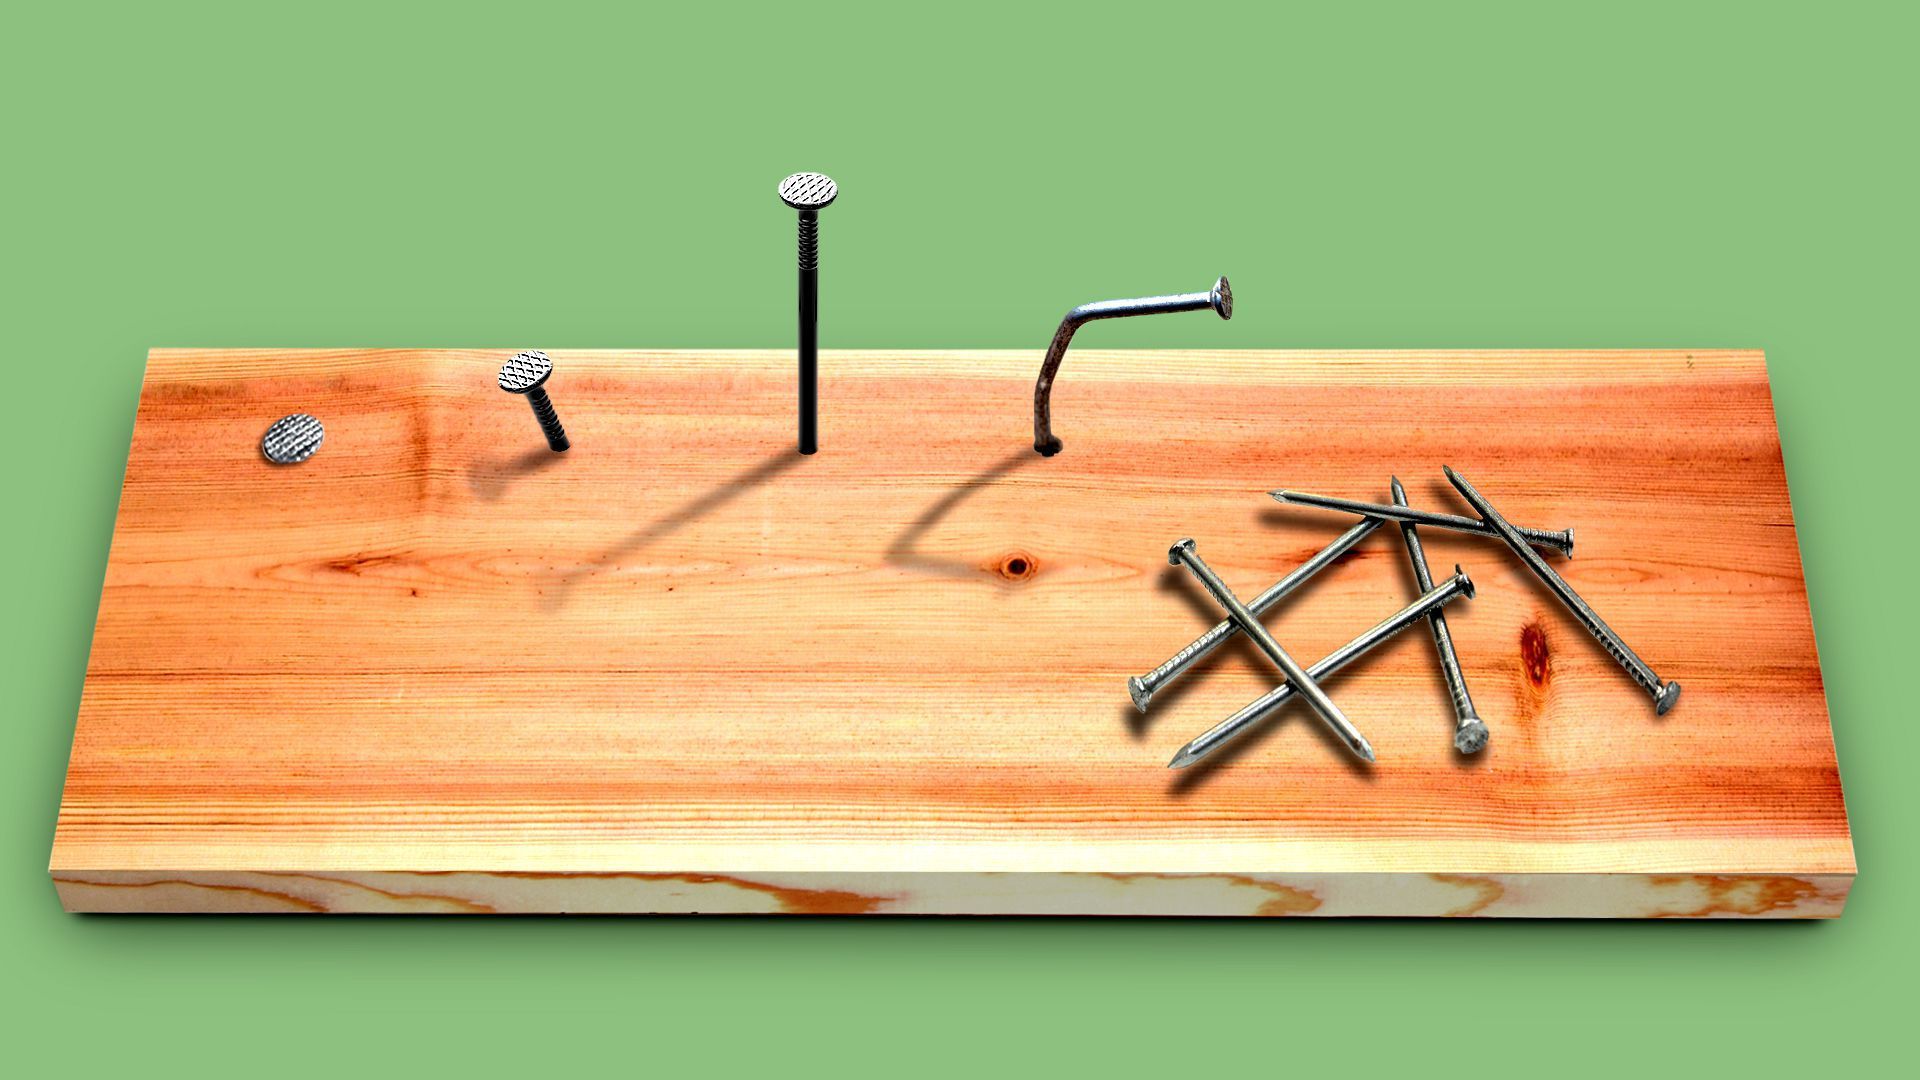 Illustration of bent nails in a board.